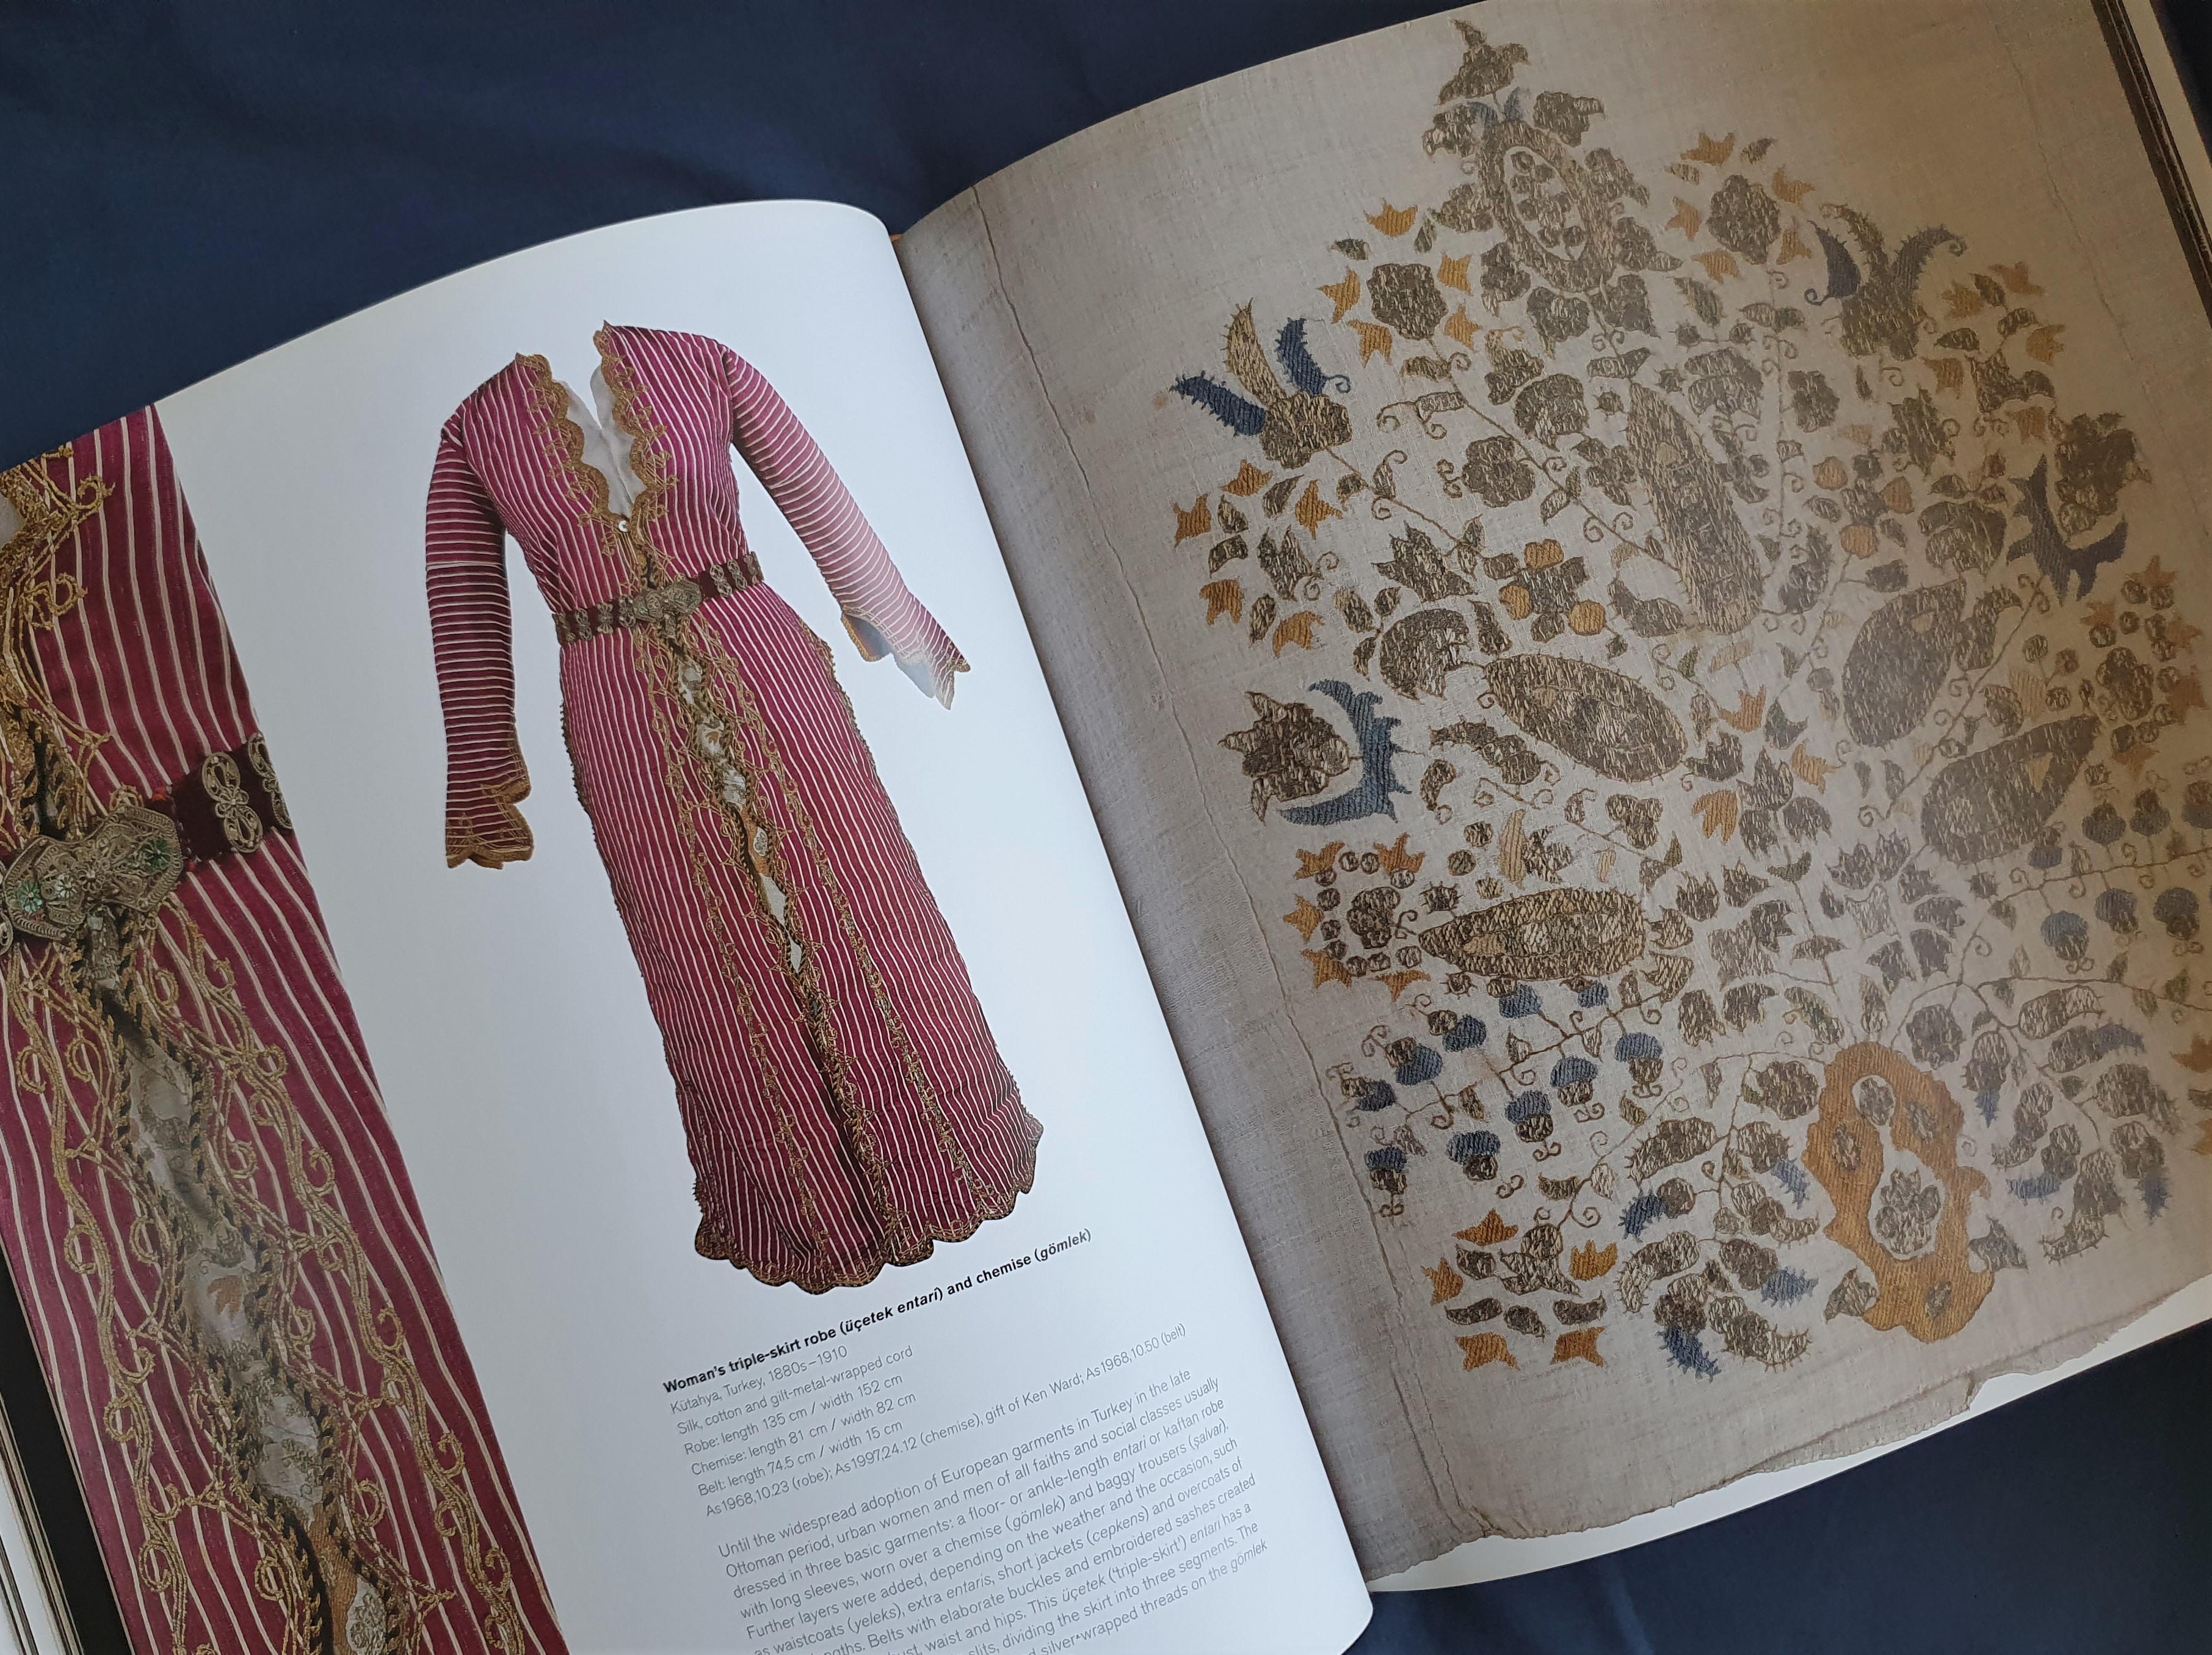 Textiles from the Middle East